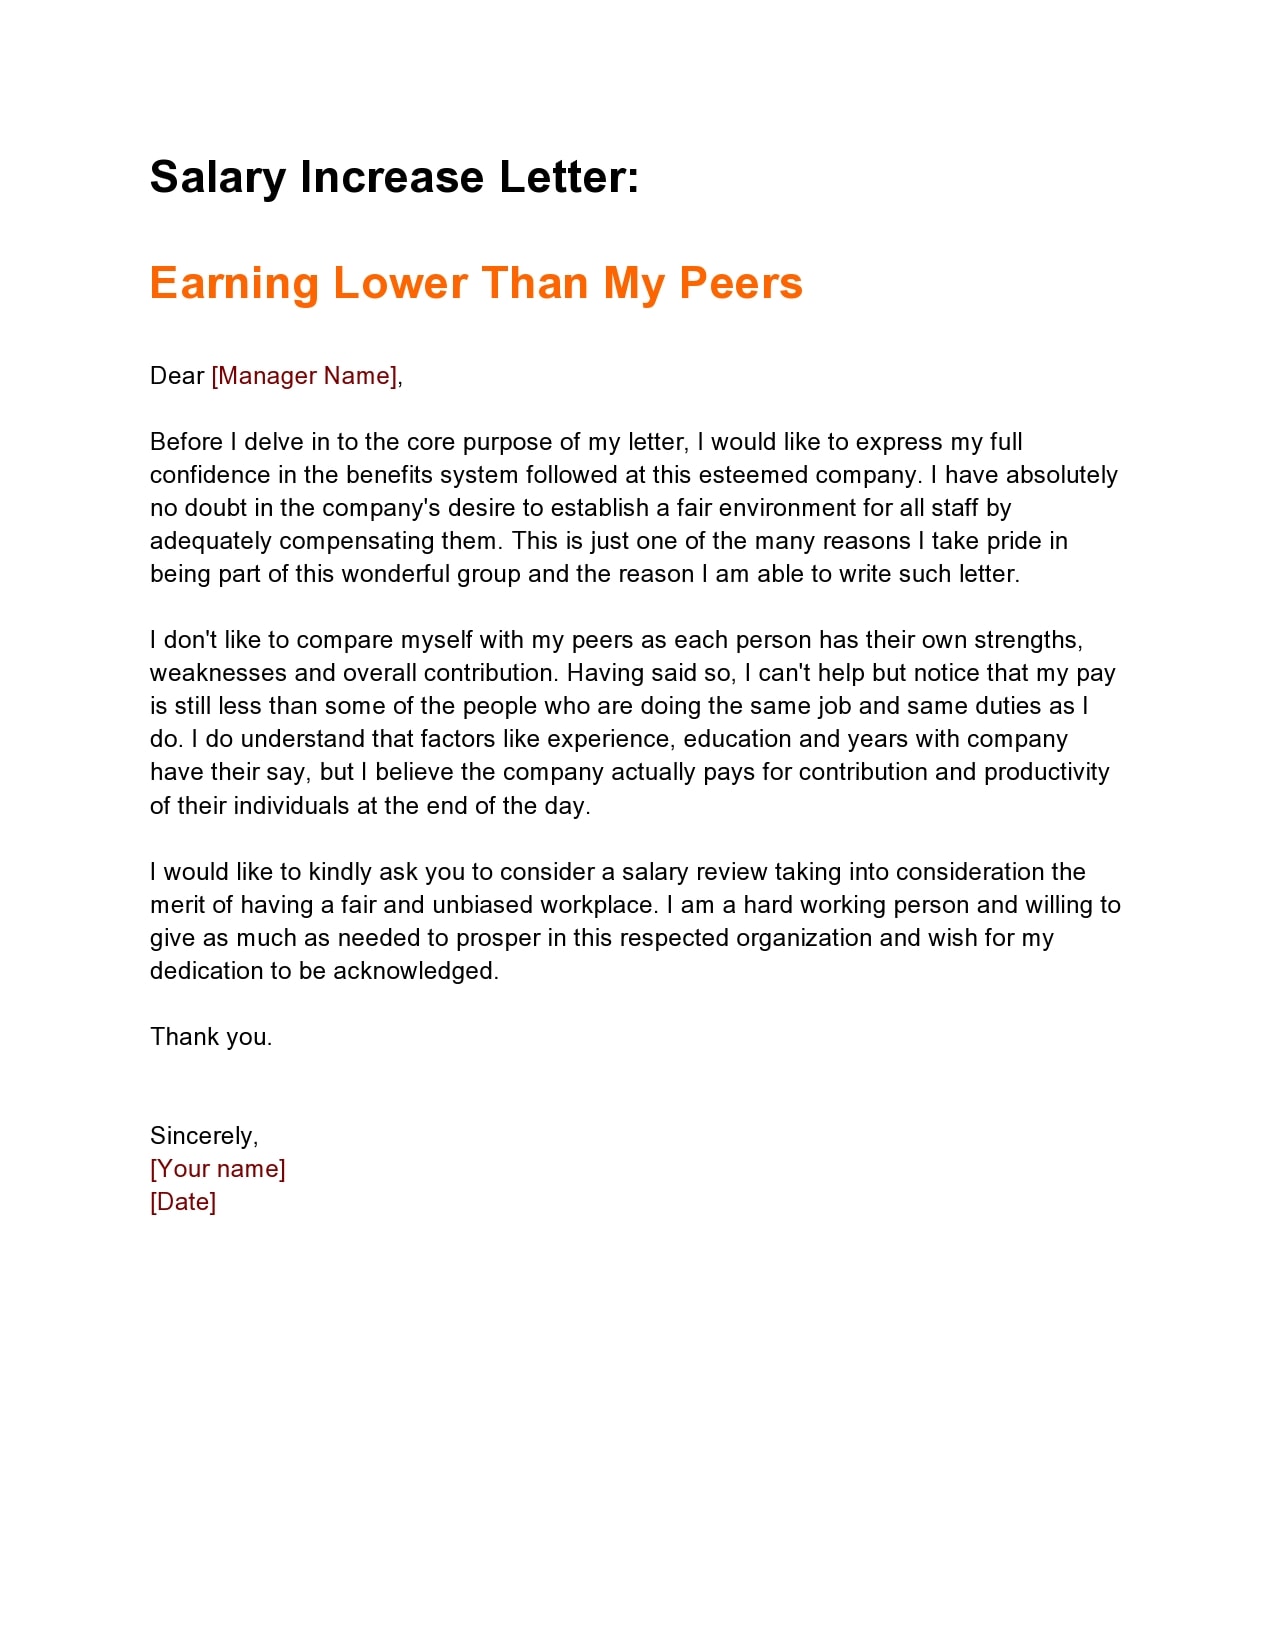 30 Effective Salary Increase Letters & Samples - TemplateArchive